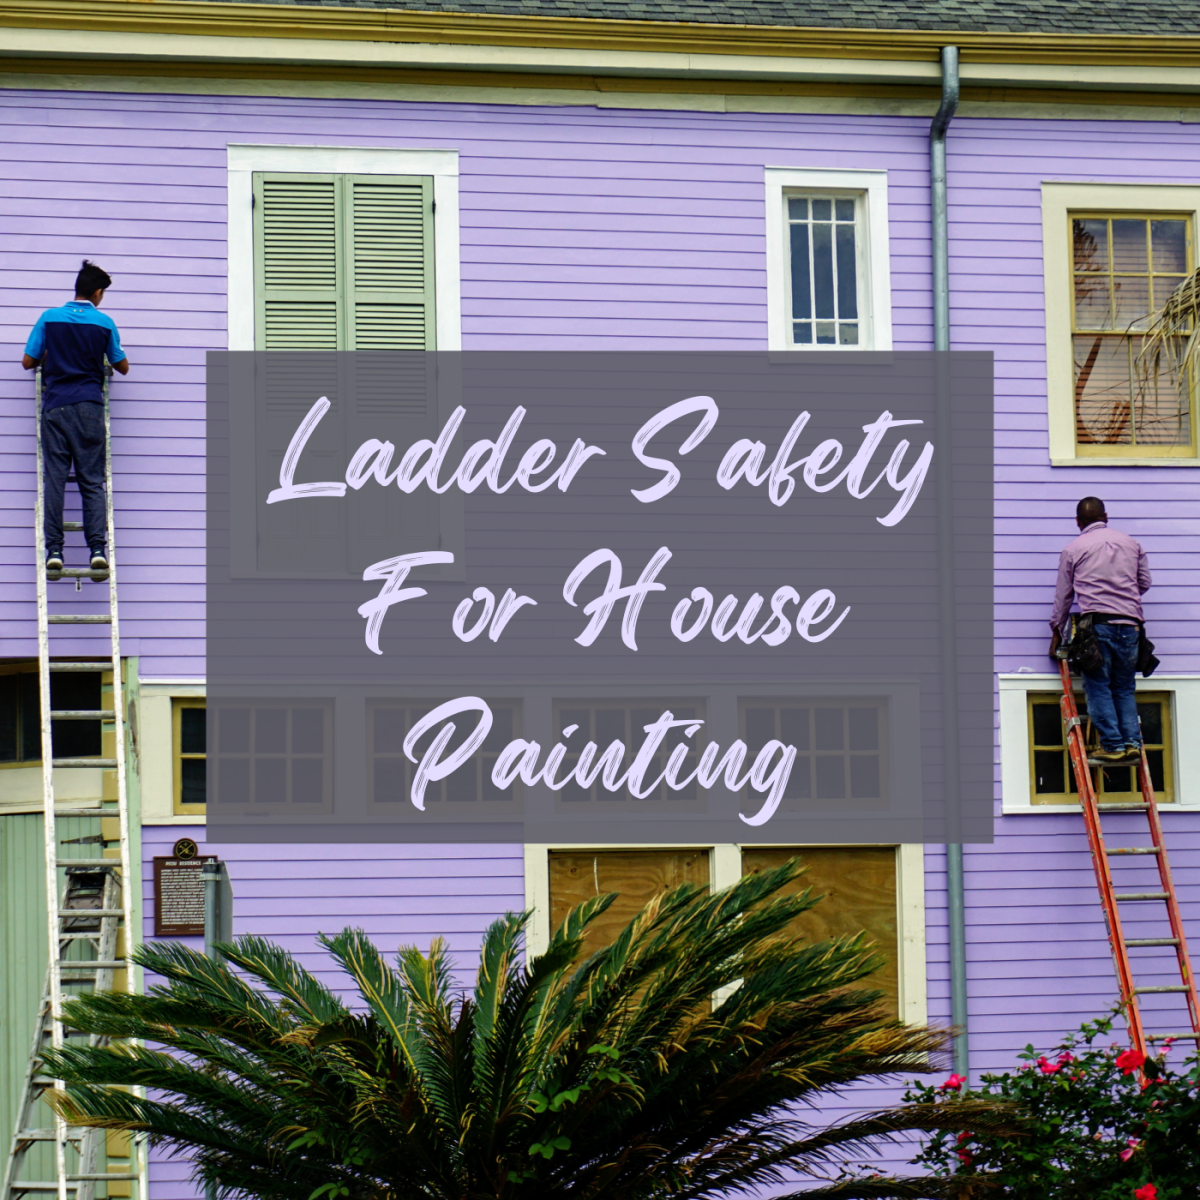 Safety tips for using ladders when painting a house.